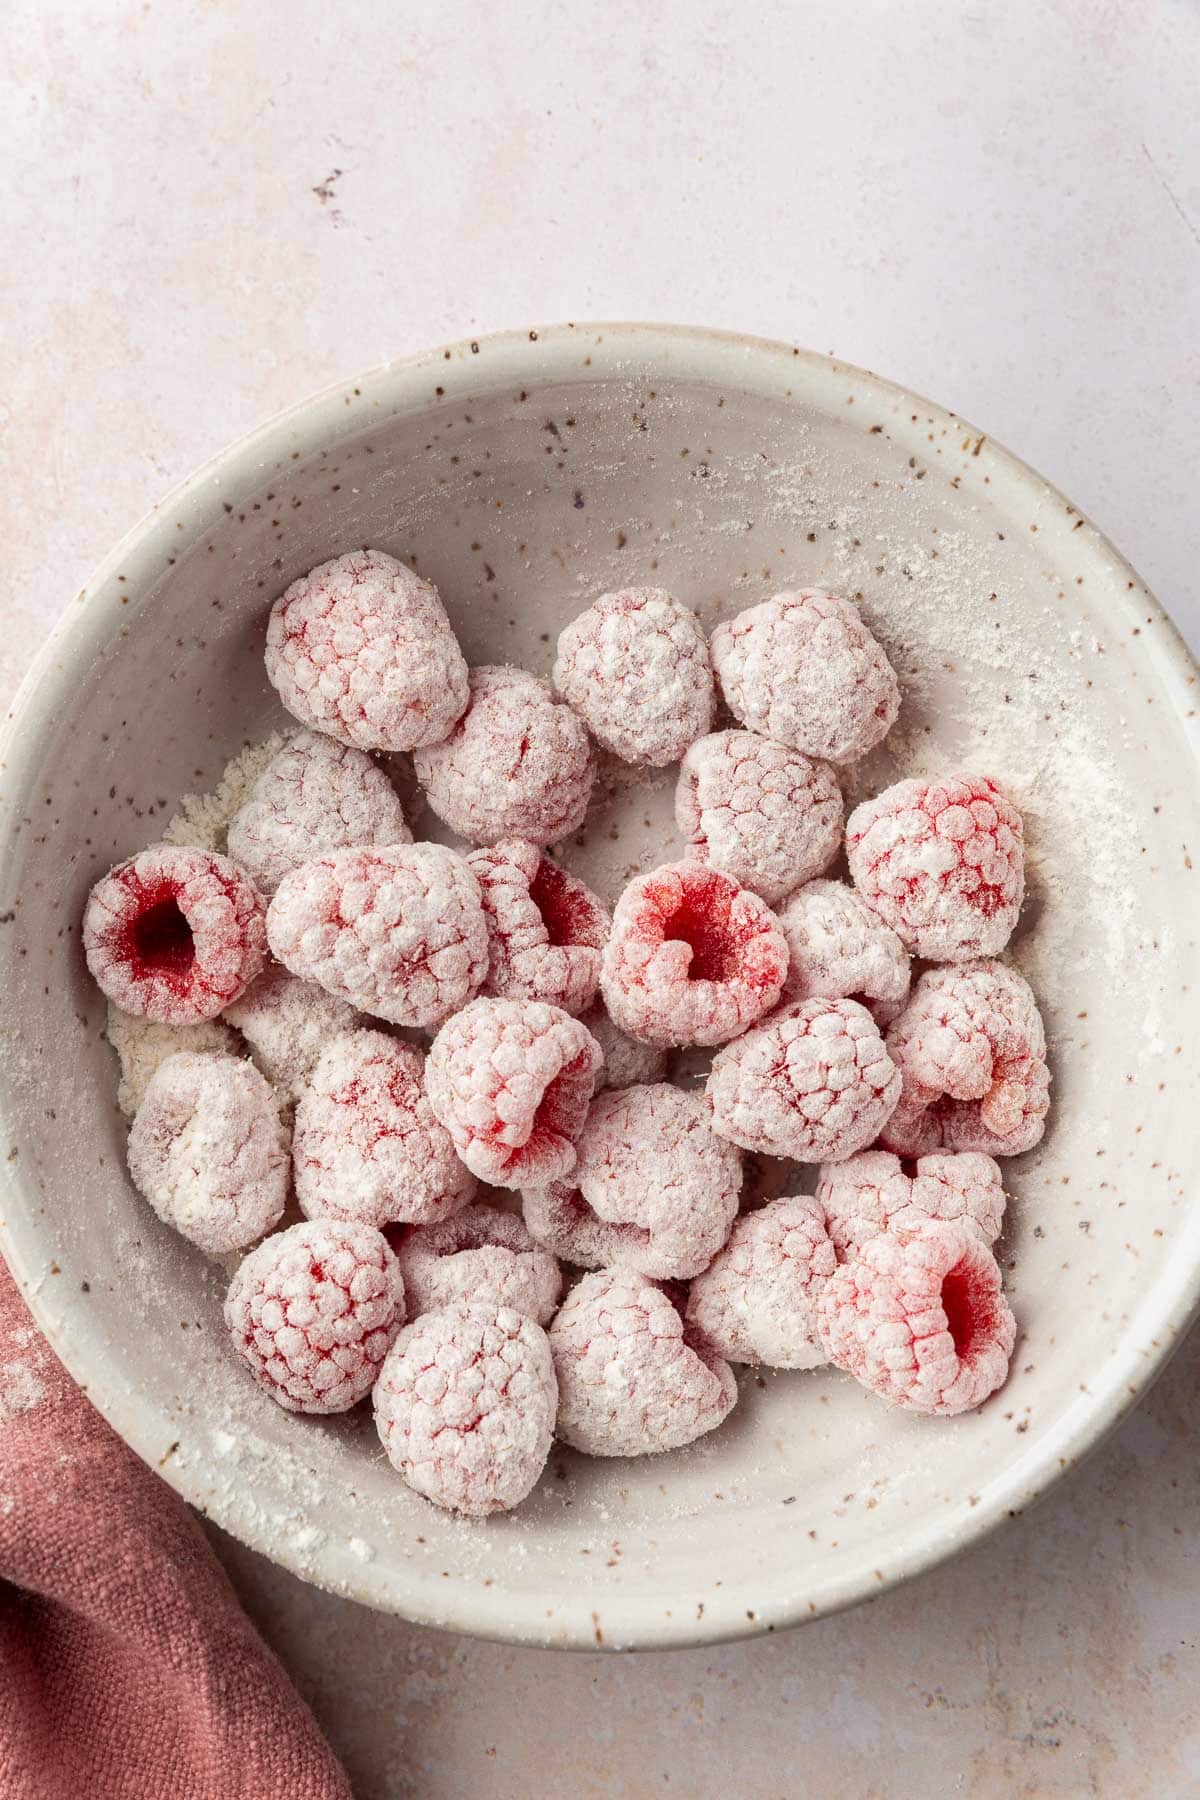 A ceramic bowl with fresh raspberries covered in gluten-free flour in it.